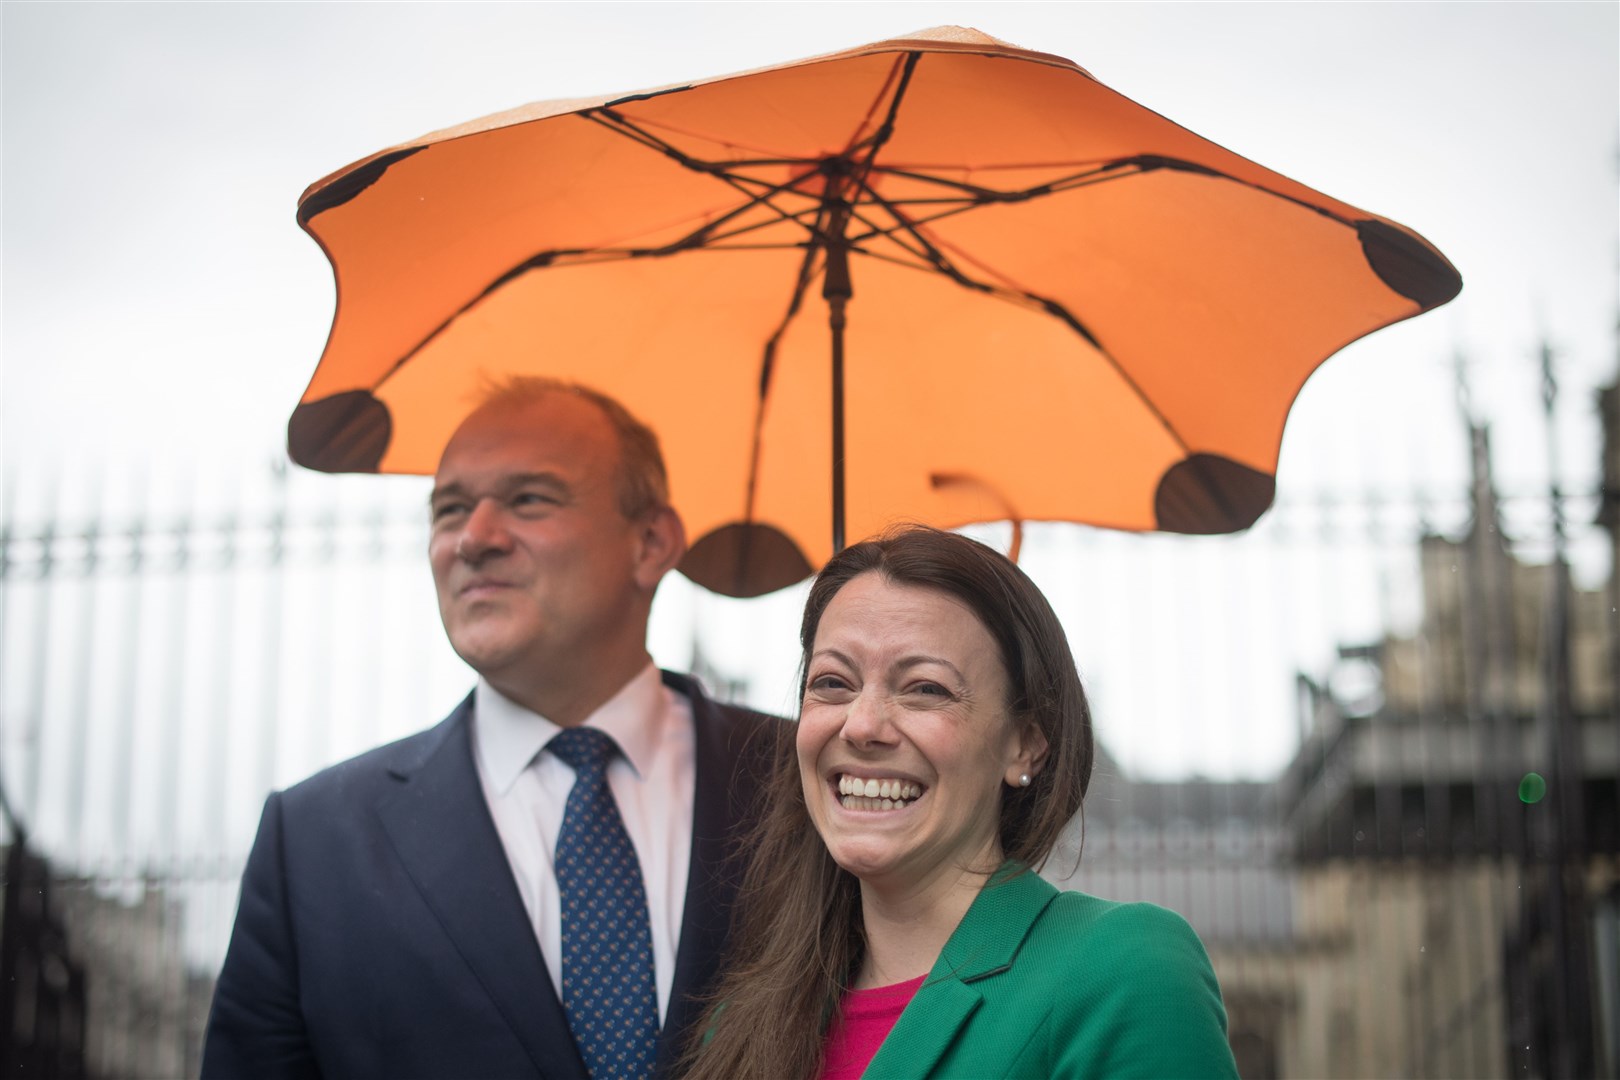 Newly elected Liberal Democrat MP for Chesham and Amersham Sarah Green is welcomed to the House of Commons by party leader Sir Ed Davey (Stefan Rousseau/PA)